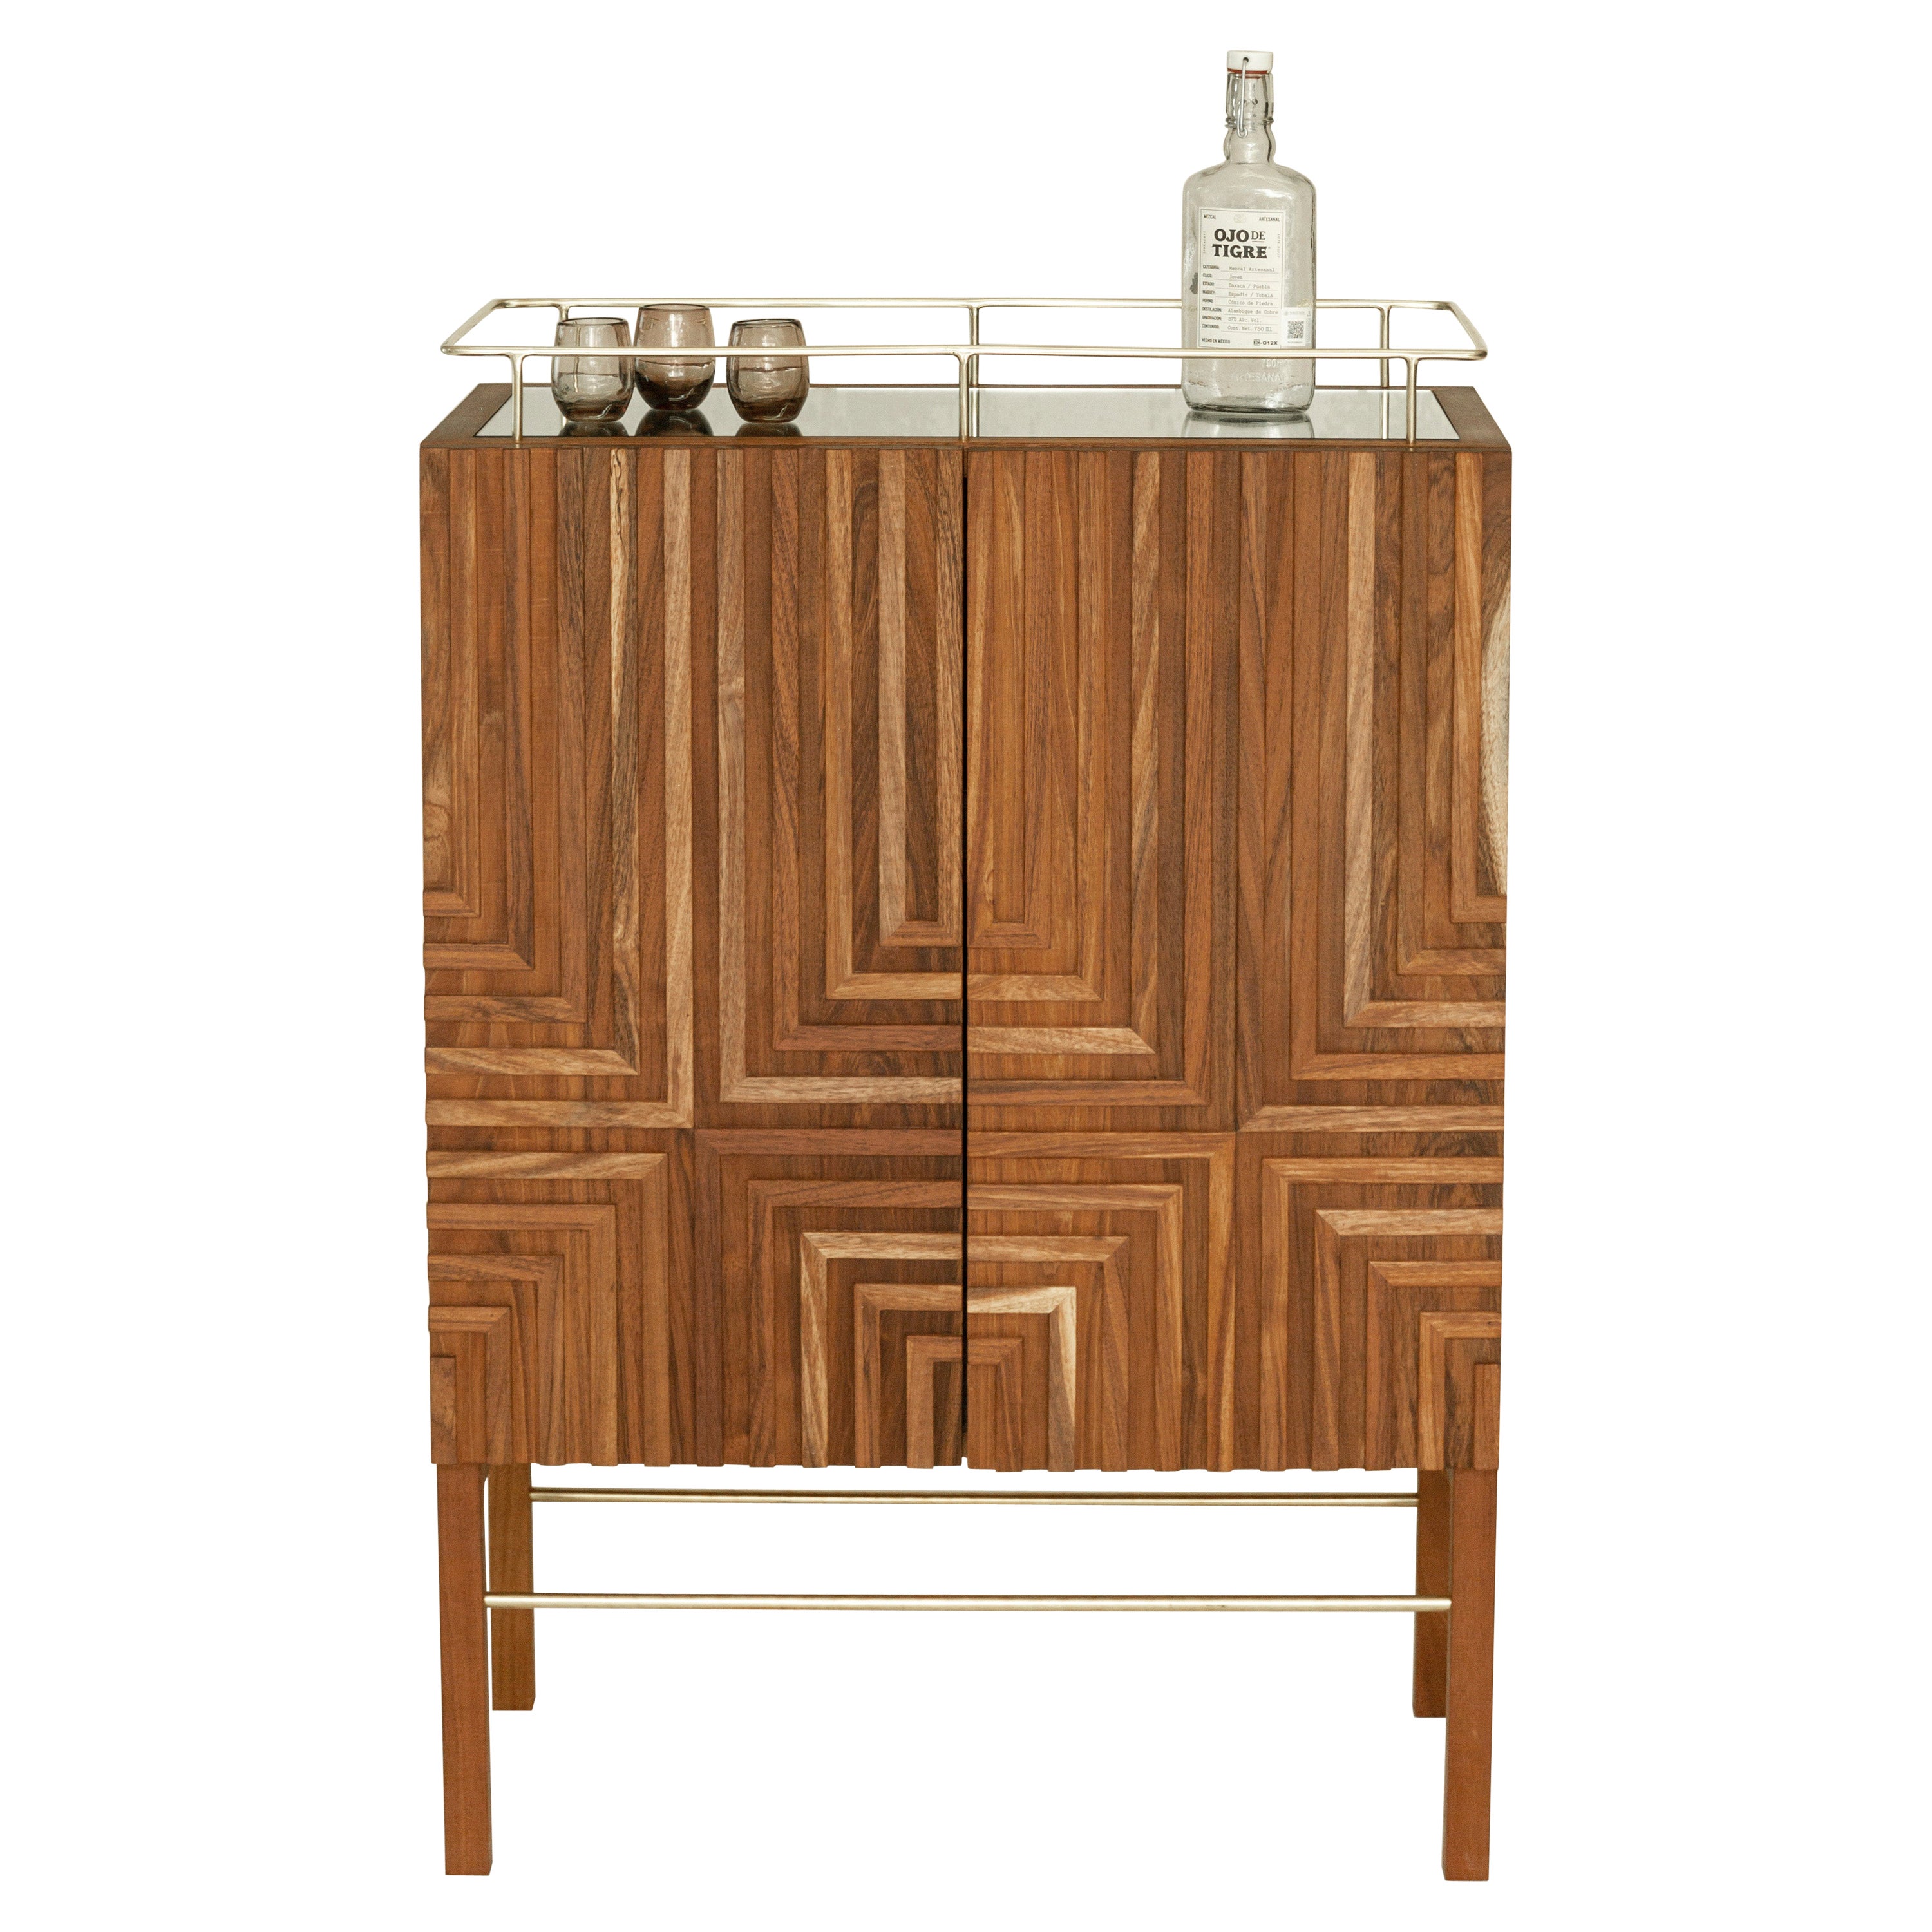 Stellenbosch Bar Cabinet in Tzalam Wood by Tana Karei For Sale